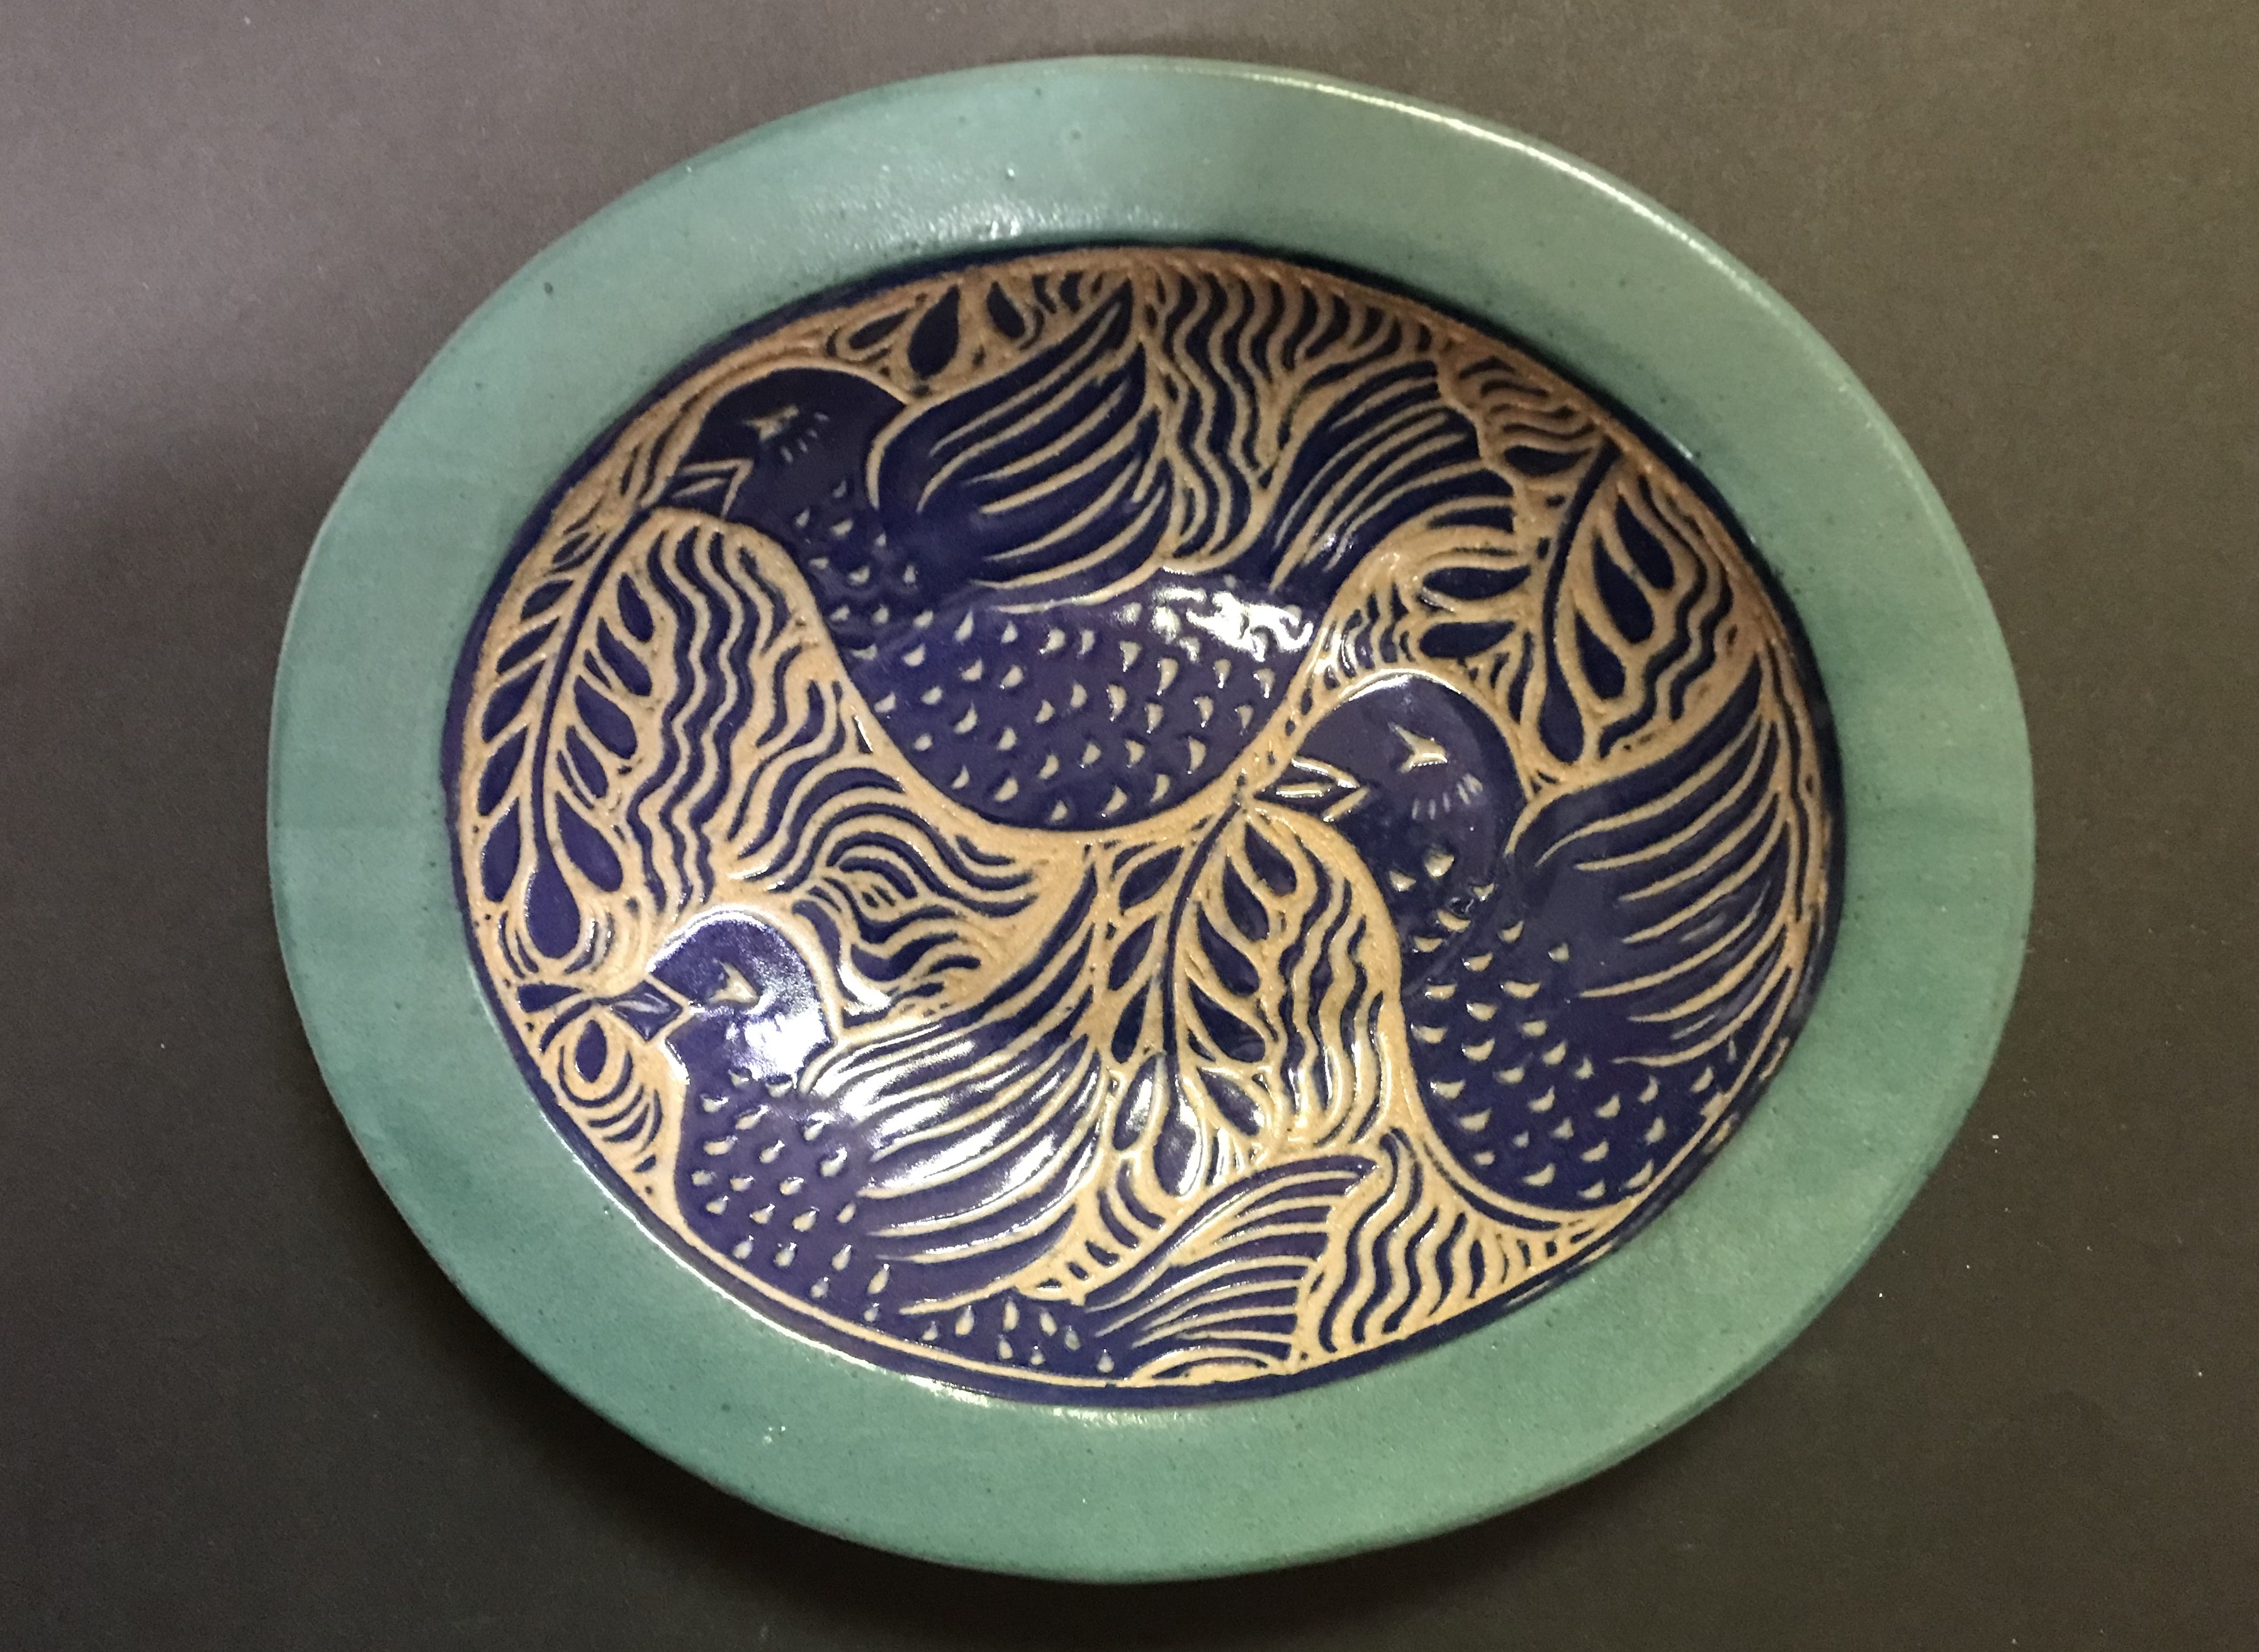 Ceramic Oval Serving Dish in Cobalt Blue, White, and Turquoise with Stylized Peace Bird Desgin